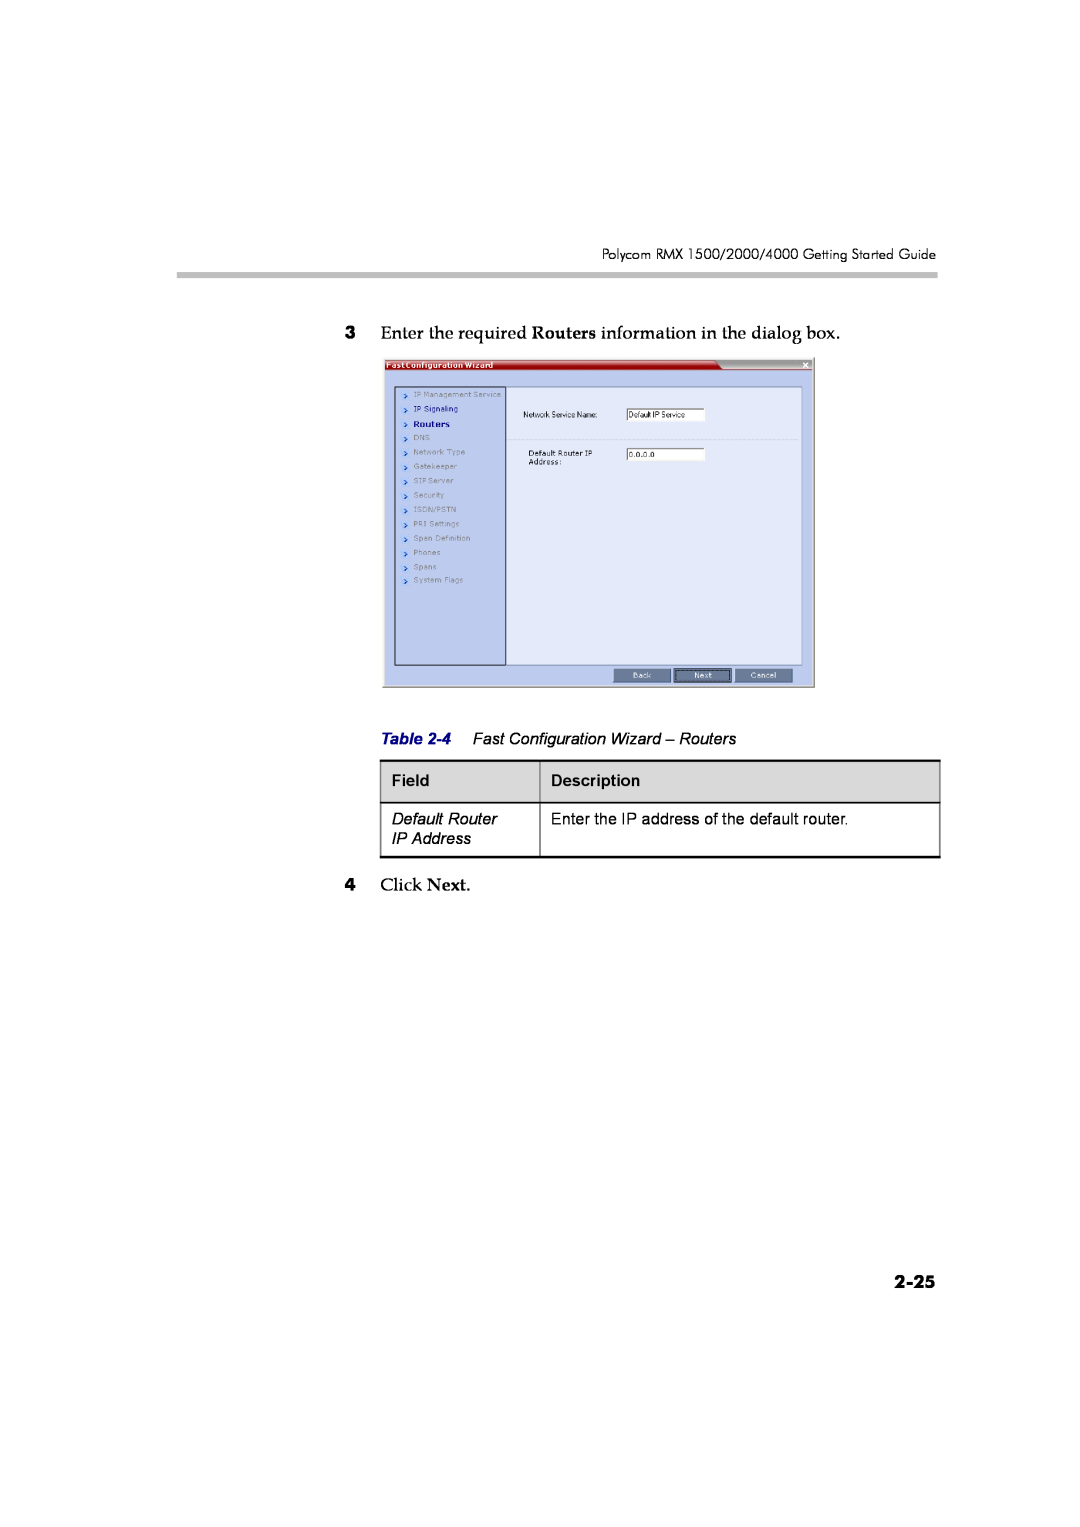 Polycom DOC2560B manual 2-25, Enter the required Routers information in the dialog box, Click Next, Field, Description 